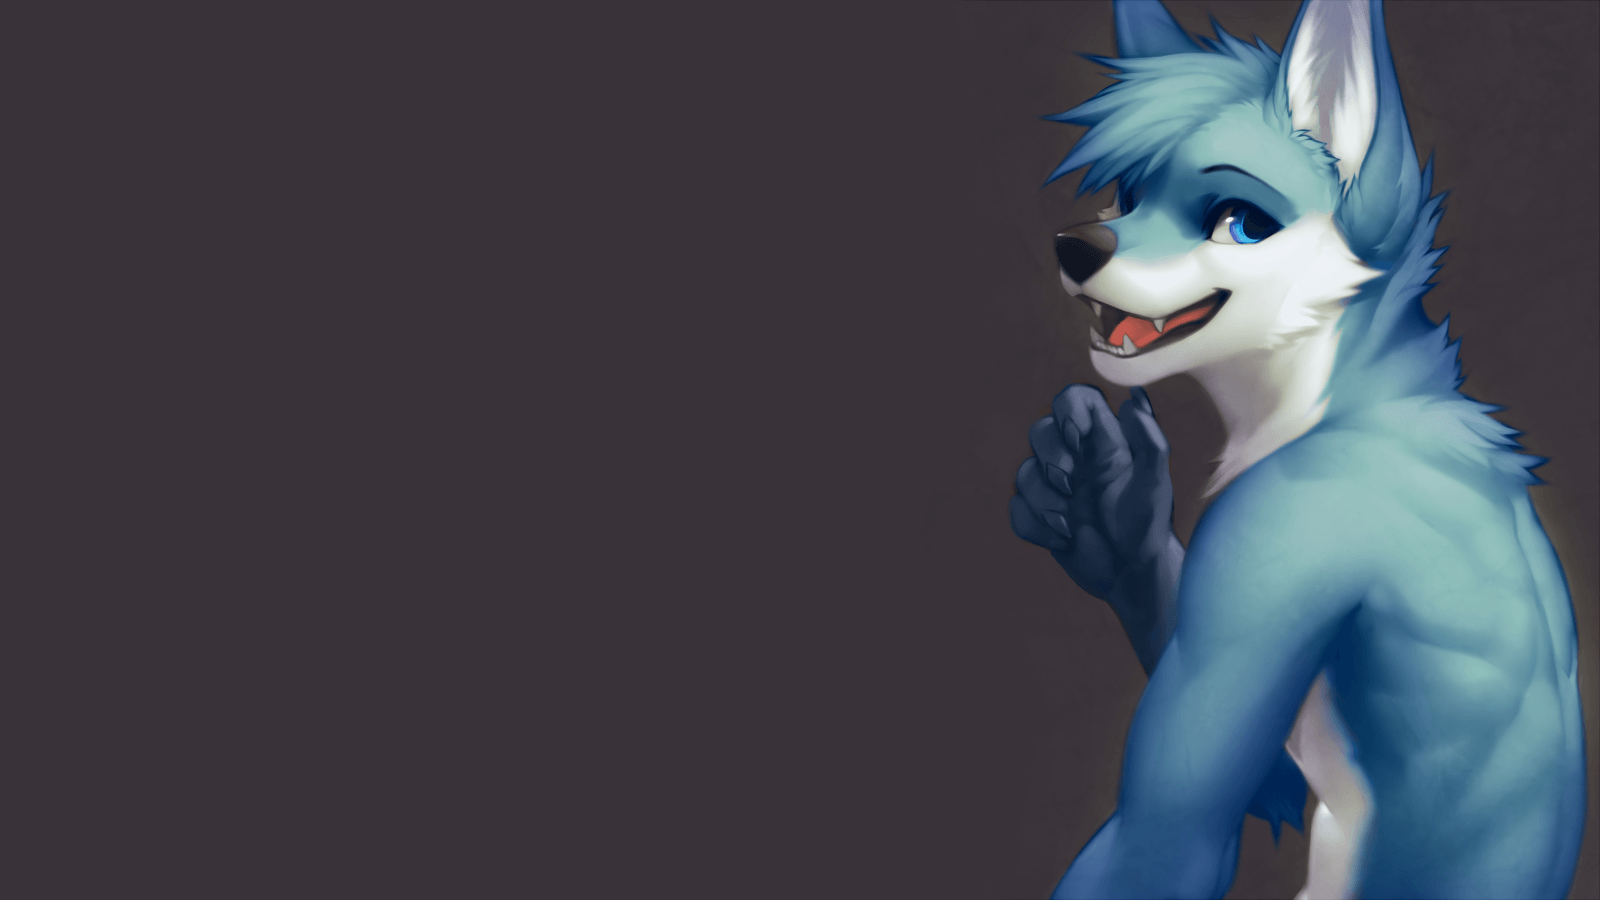 Furry Wallpaper Free Furry Background